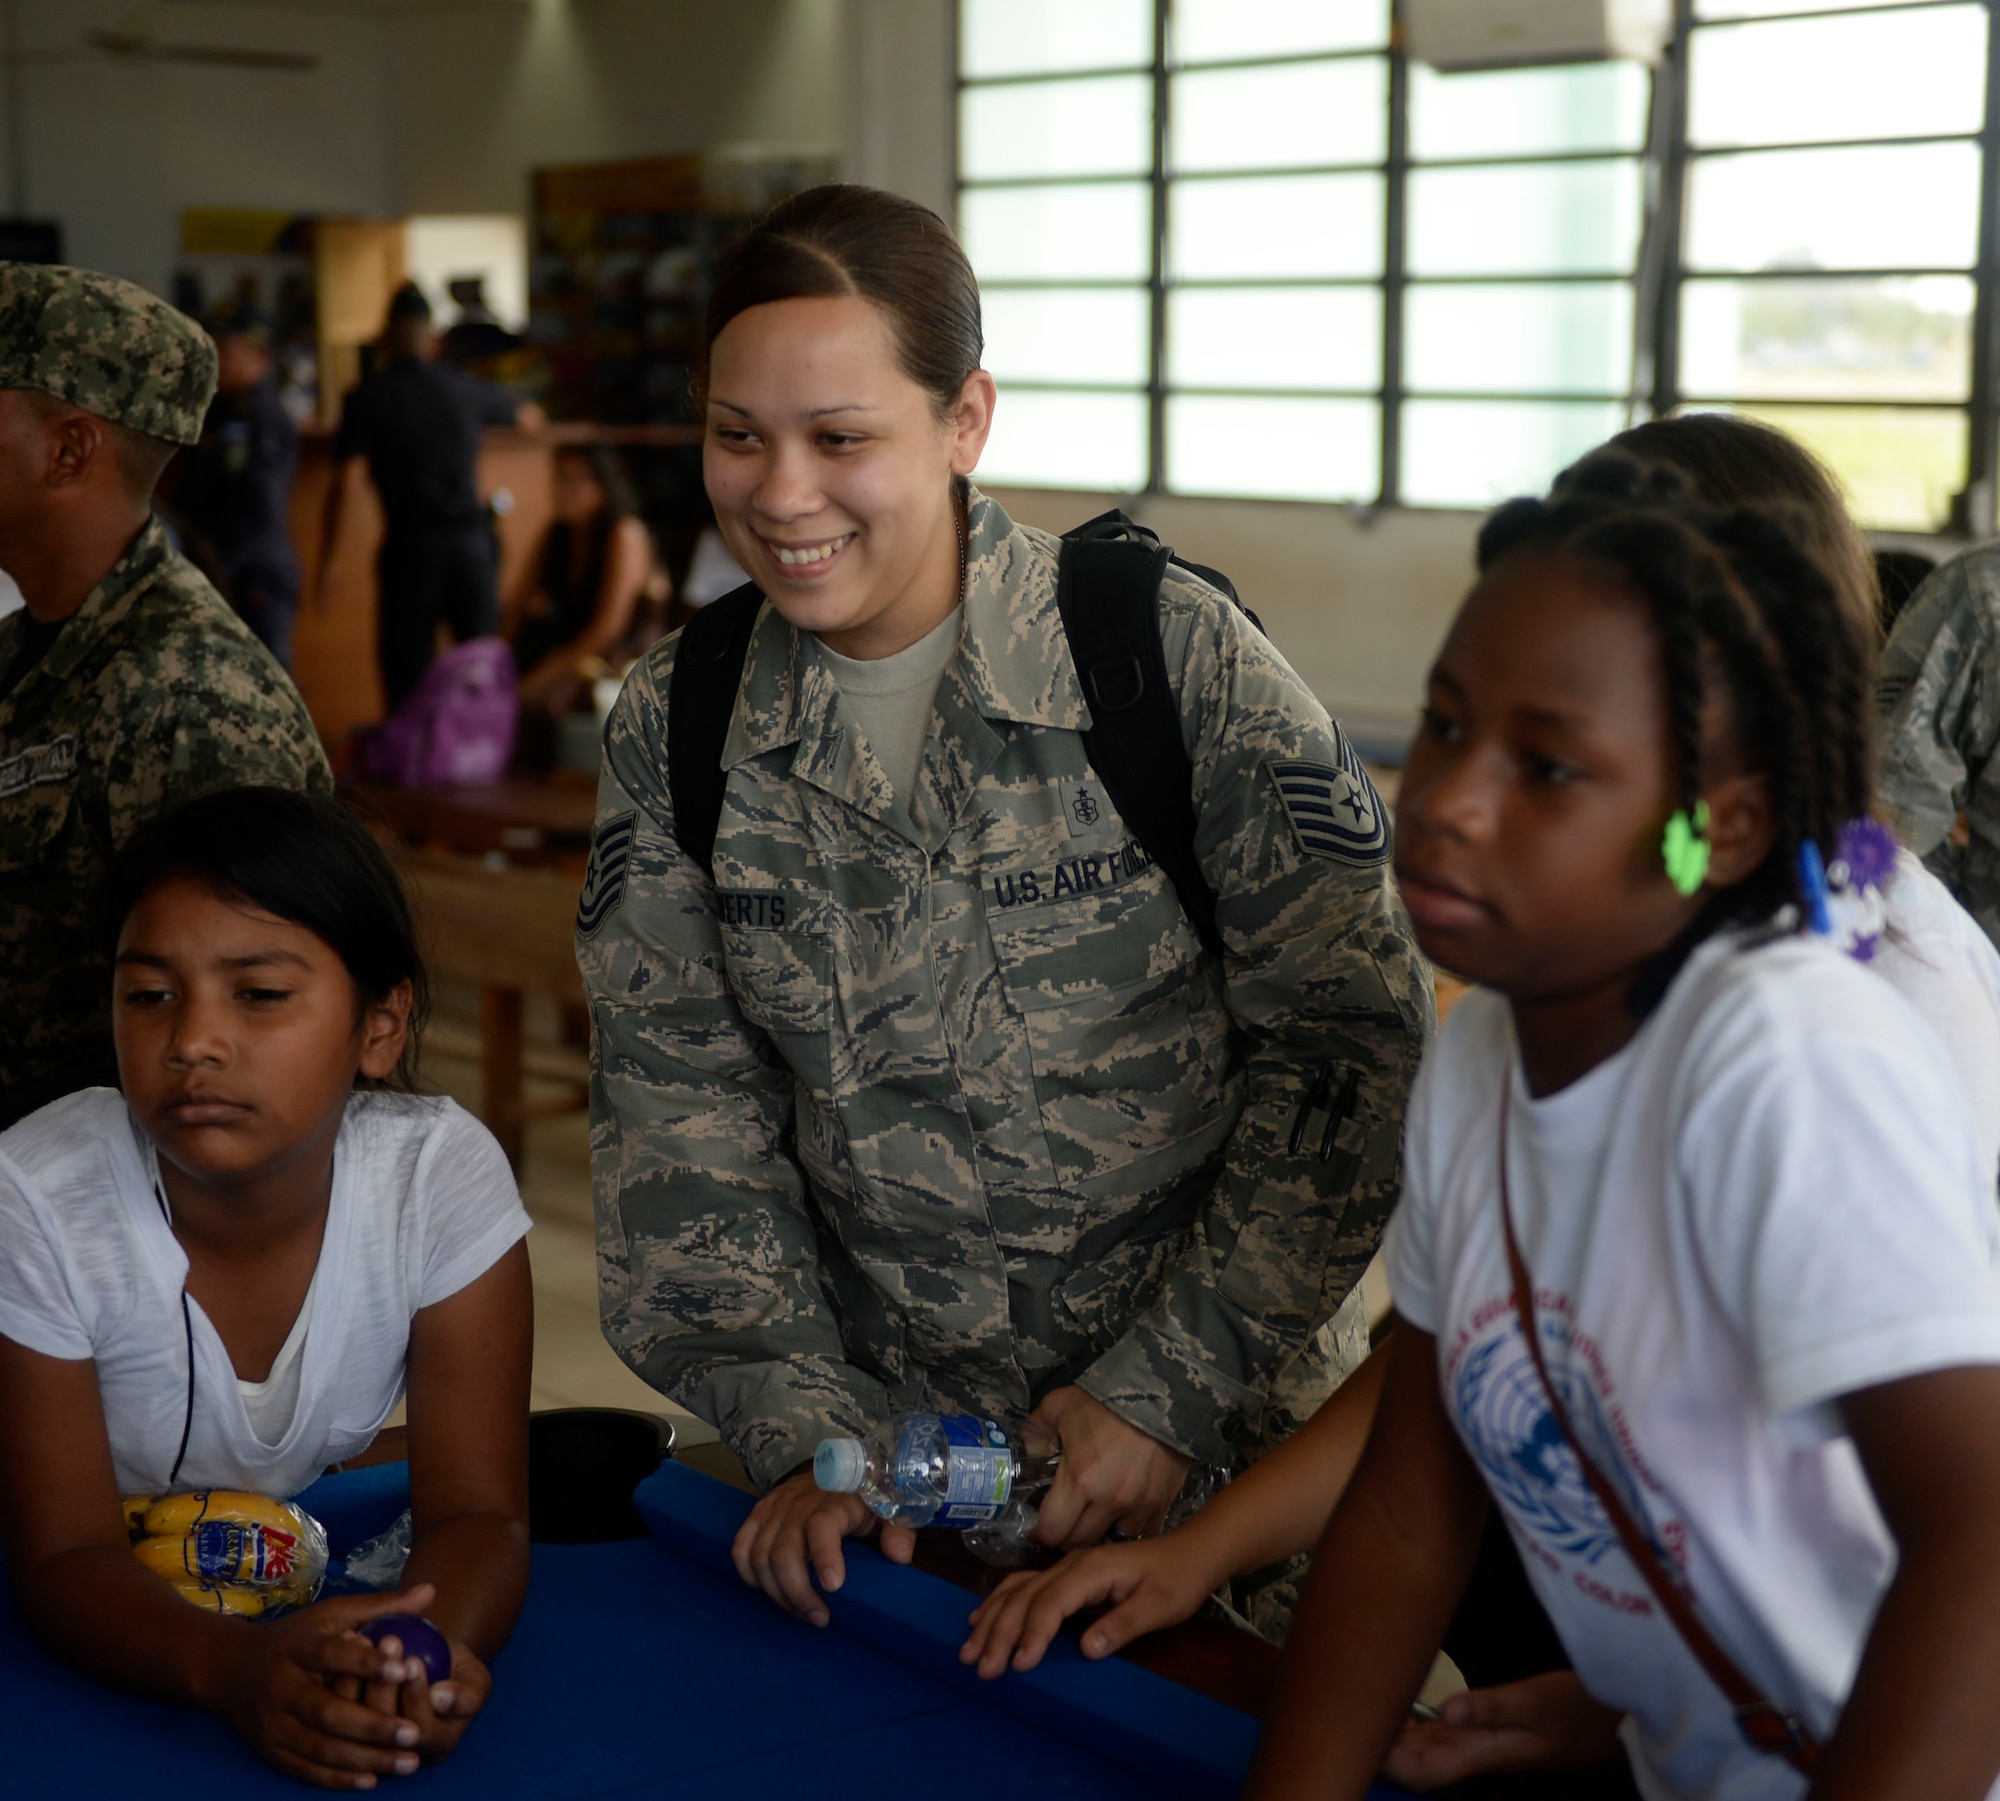 U.S. Tech. Sgt. Tiffany Rewerts, 87th Medical Operations Squadron medical technician, 87th Medical Group, out of Joint Base McGuire-Dix-Lakehurst, N.J., and Abilene, Texas native, spends time playing with children during the Guardians of the Fatherland event at Puerto Castillo Naval Base in Trujillo, Honduras, June 6, 2015. The event was attended my more than 20 NEW HORIZONS Honduras 2015 volunteers. NEW HORIZONS was launched in the 1980s and is an annual joint humanitarian assistance exercise that U.S. Southern Command conducts with a partner nation in Central America, South America or the Caribbean. The exercise improves joint training readiness of U.S. and partner nation civil engineers, medical professionals and support personnel through humanitarian assistance activities. (U.S. Air Force photo by Capt. David J. Murphy/Released)